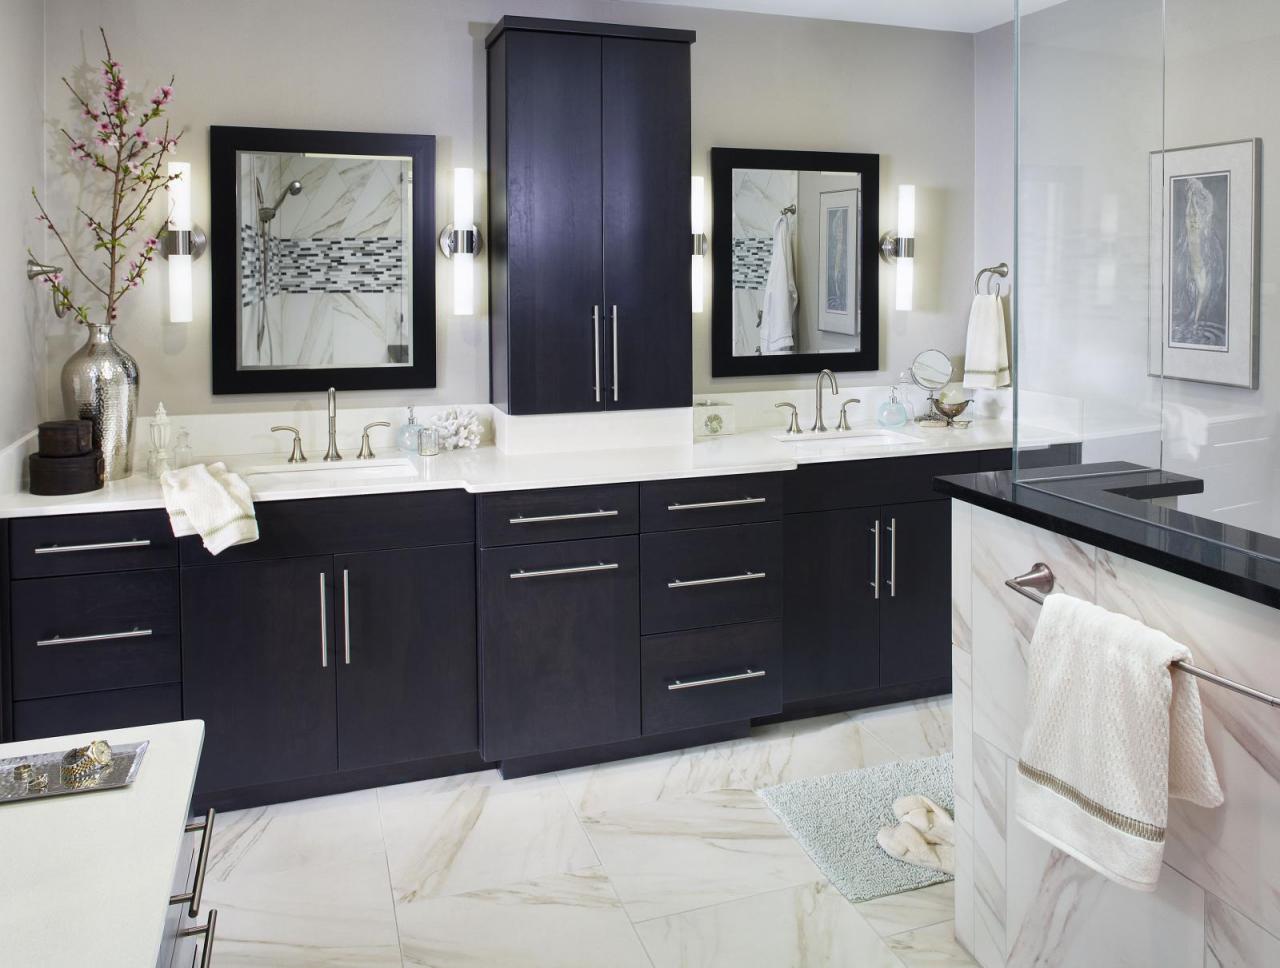 HOW TO DESIGN A LUXURY BATHROOM WITH BLACK (2) Buffets And